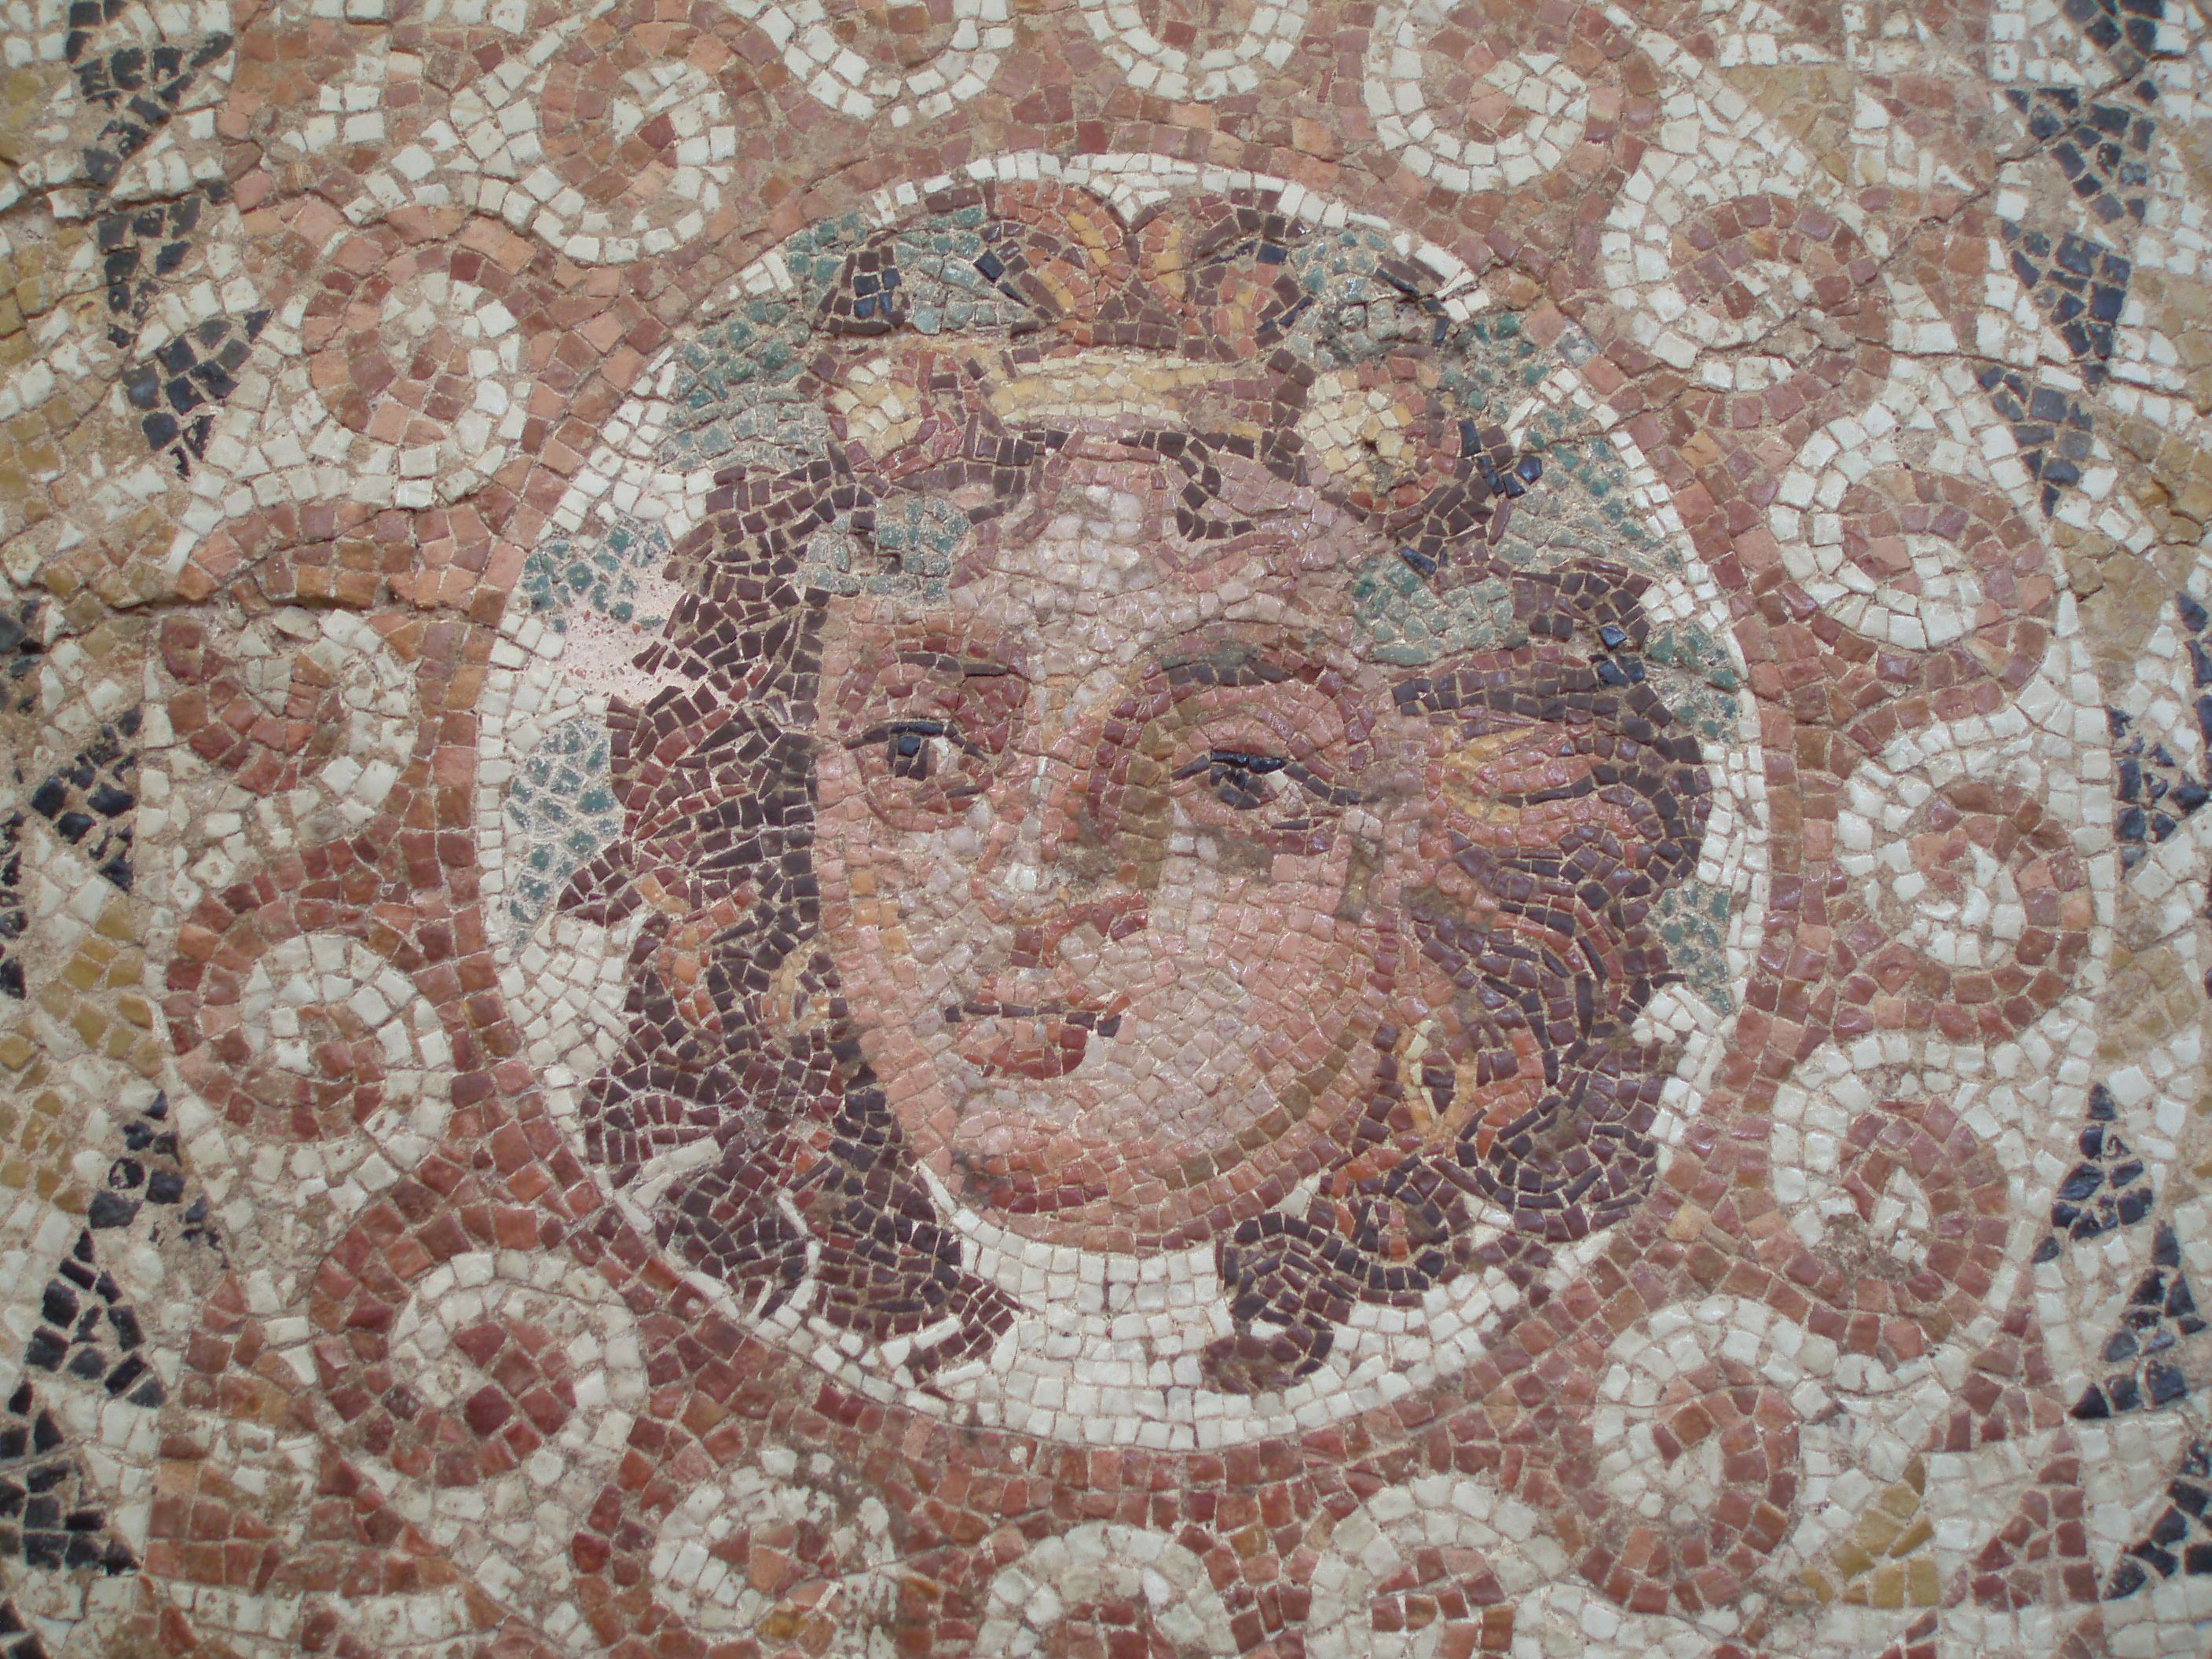 Mosaic floor from Corinth